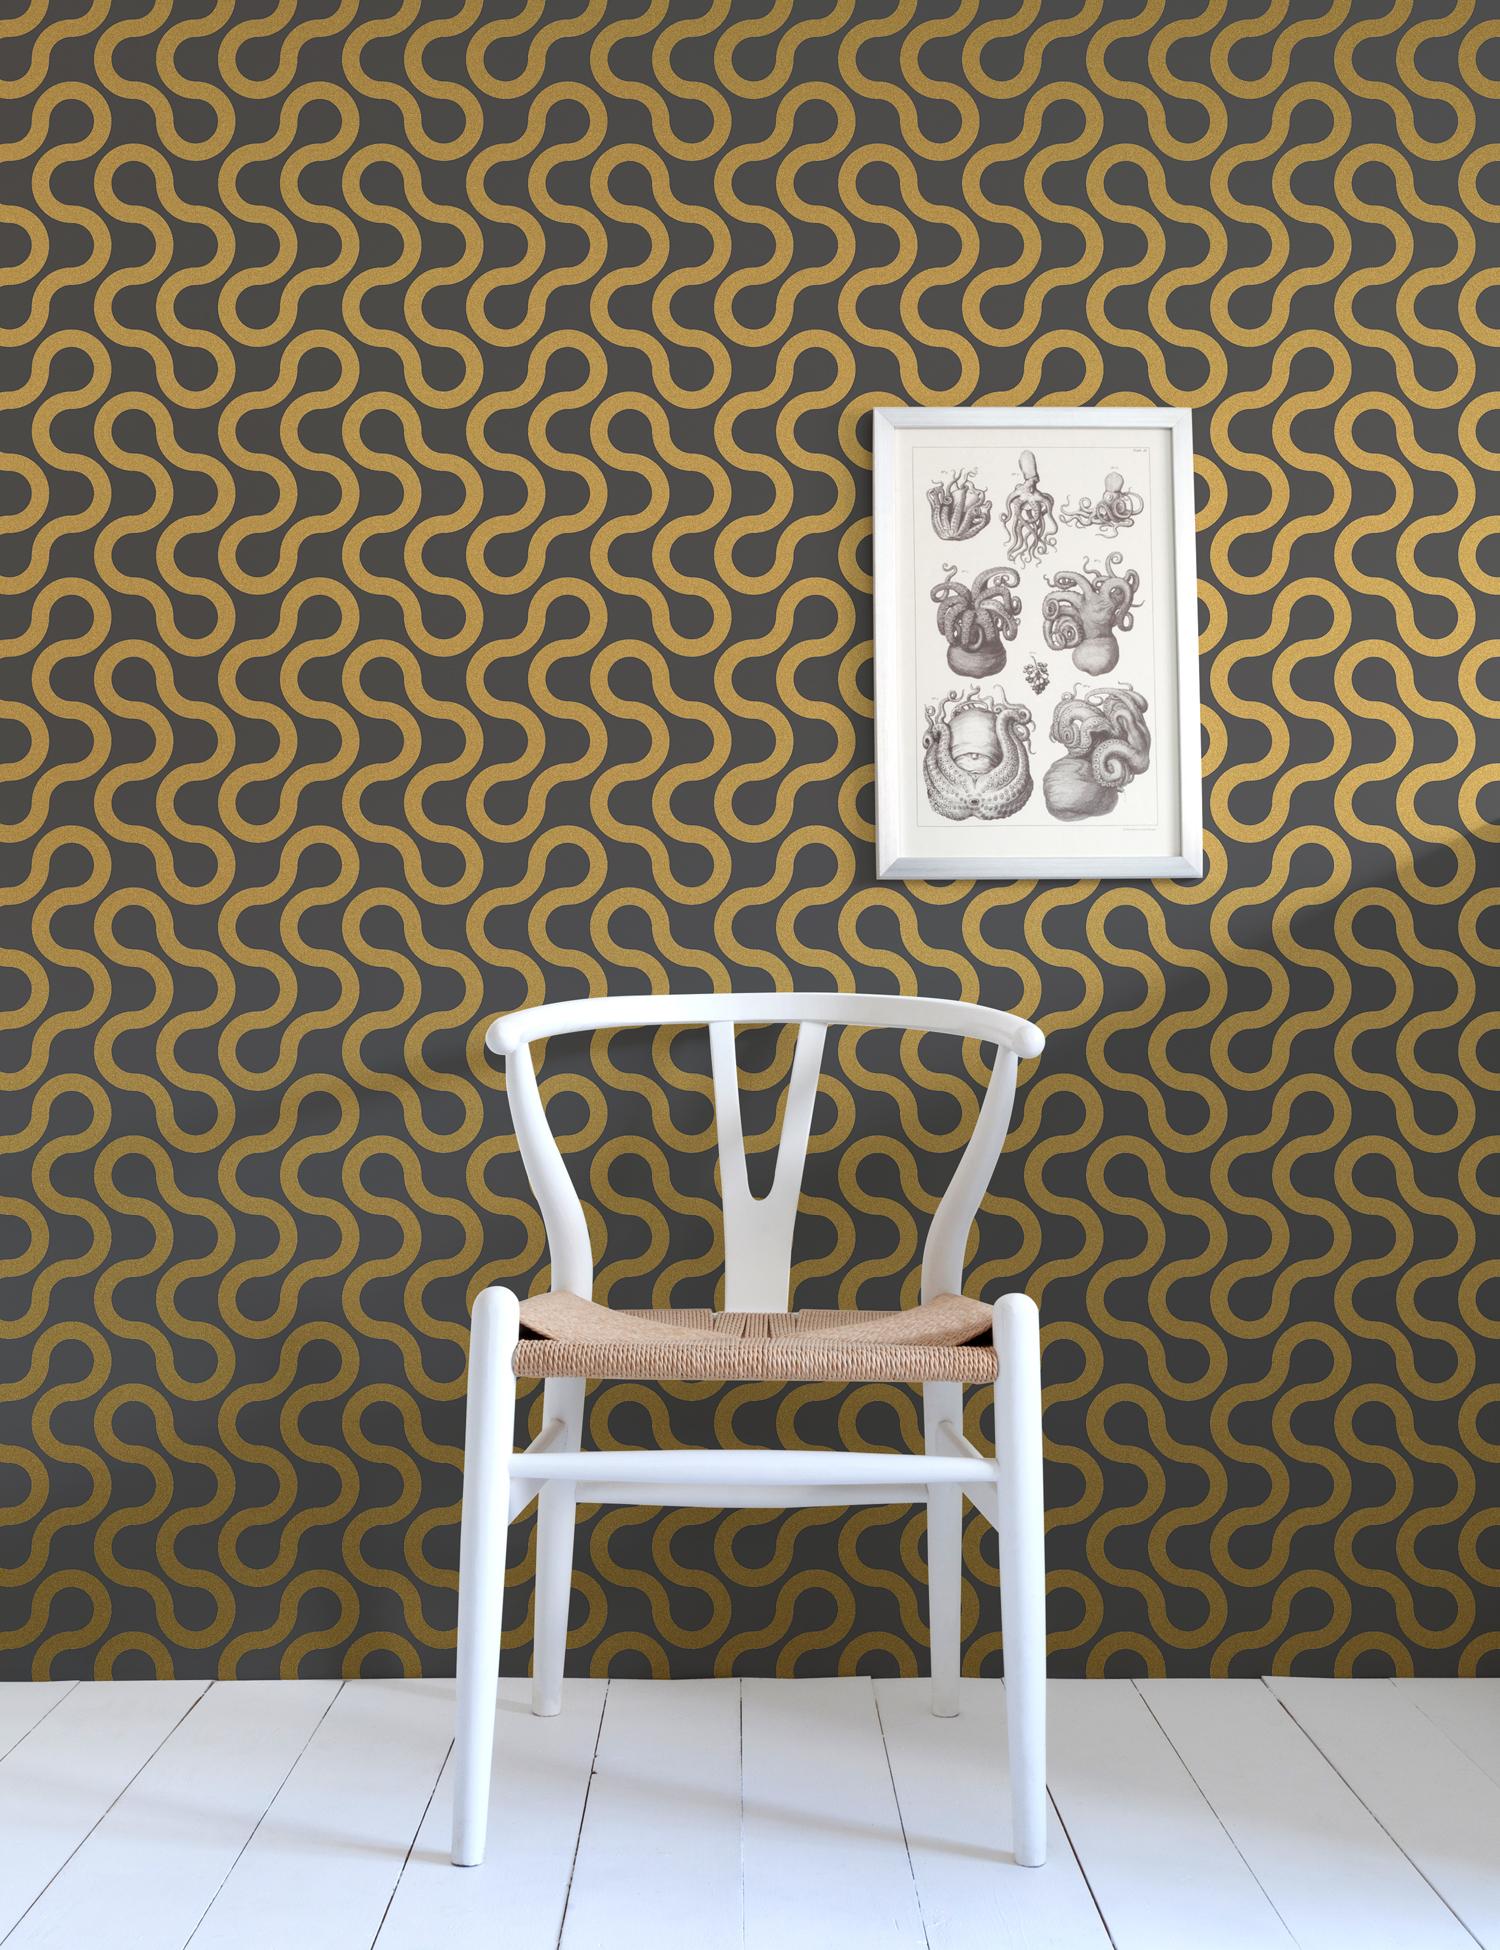 This awesome geometric by Aimée is the ultimate mod wallpaper.

Samples are available for $18 including US shipping, please message us to purchase.

Printing: Screen-printed by hand (minimum order and setup fees apply).
Material: FSC-certified